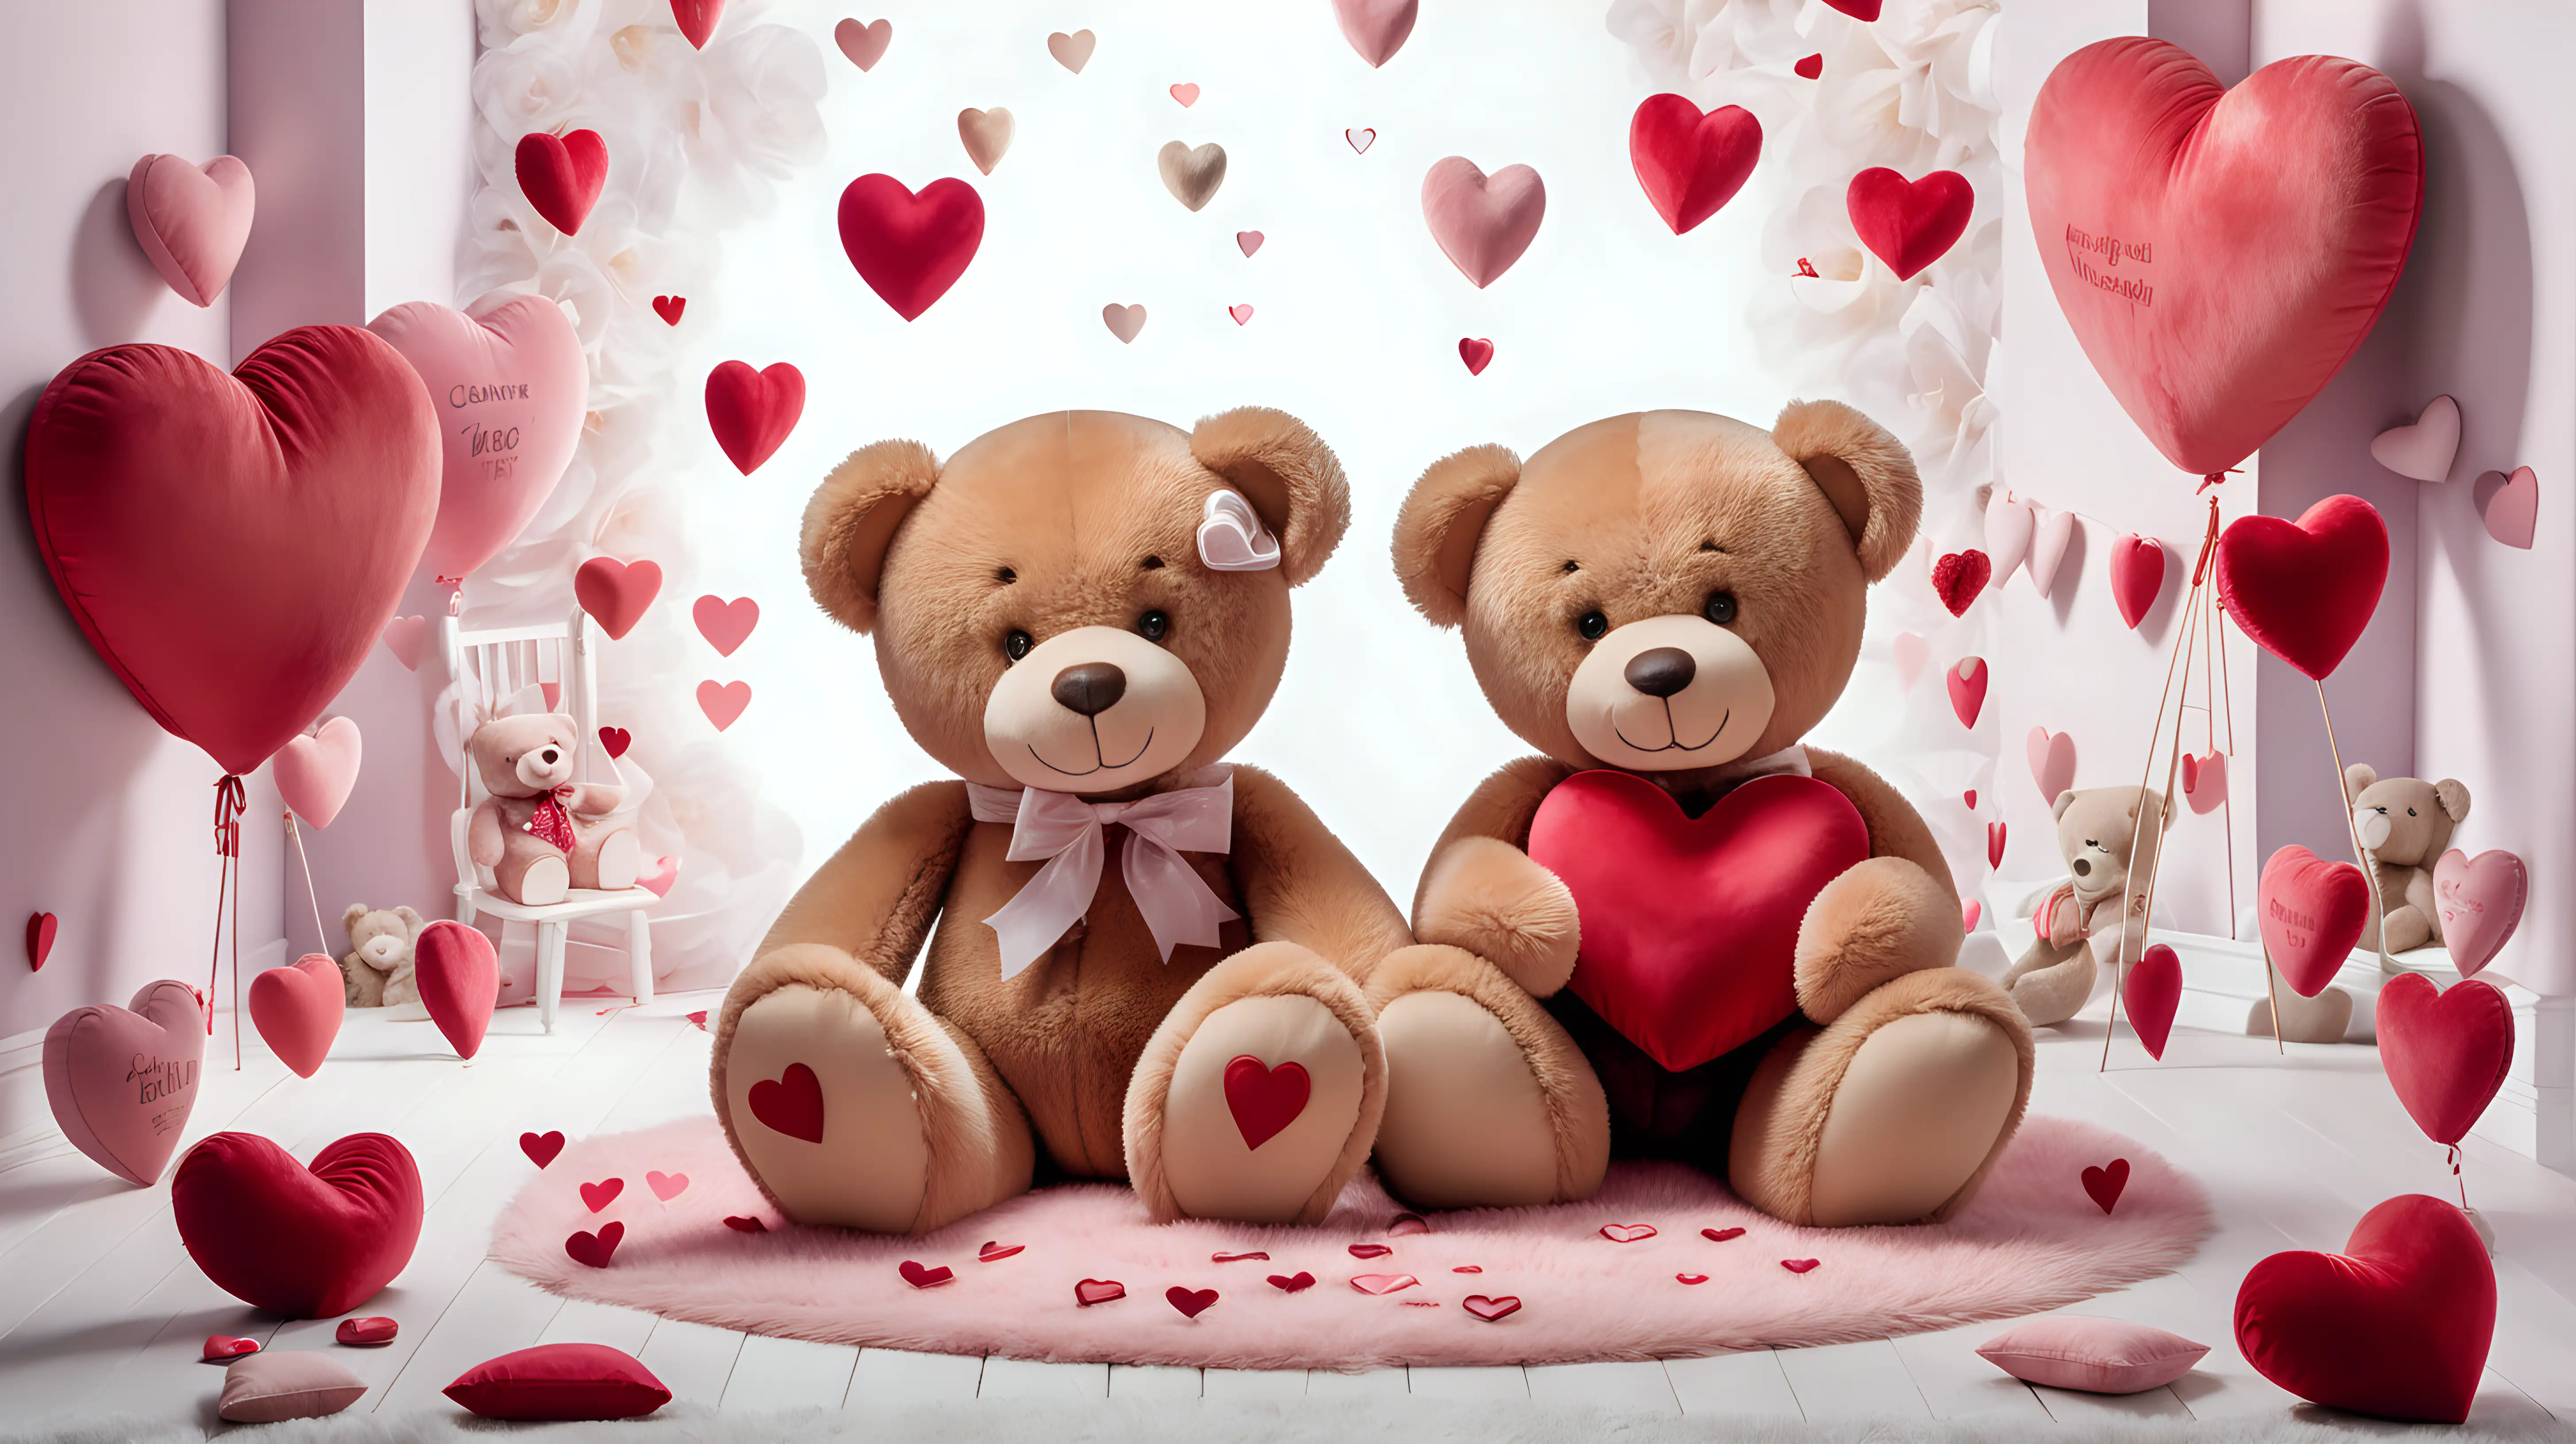 Lovefilled Void with Hearts and Teddy Bears for Expressions of Affection